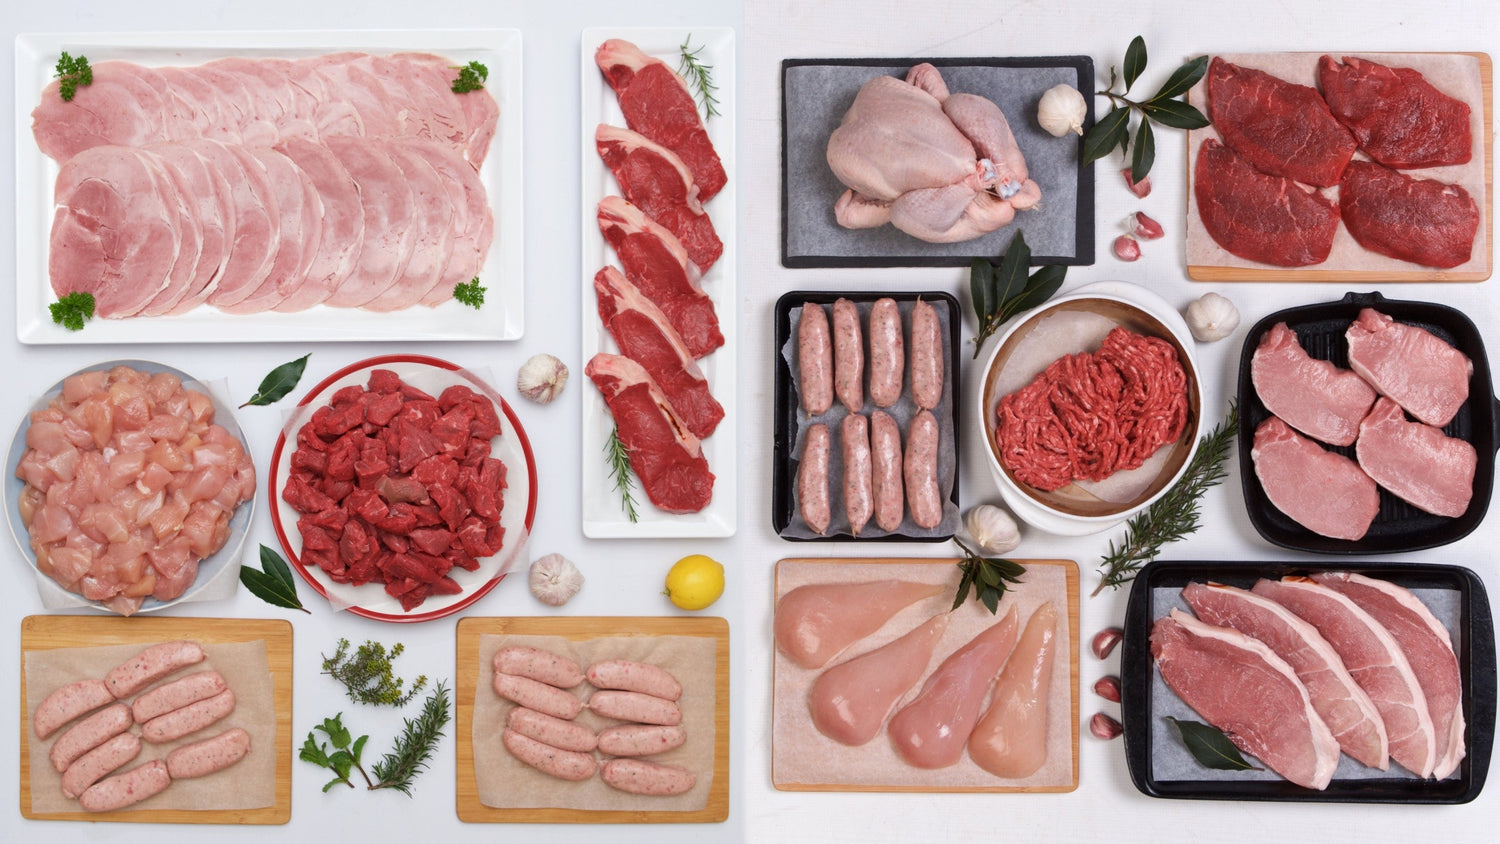 Frozen Meat Supplier Singapore - Online Meat Delivery